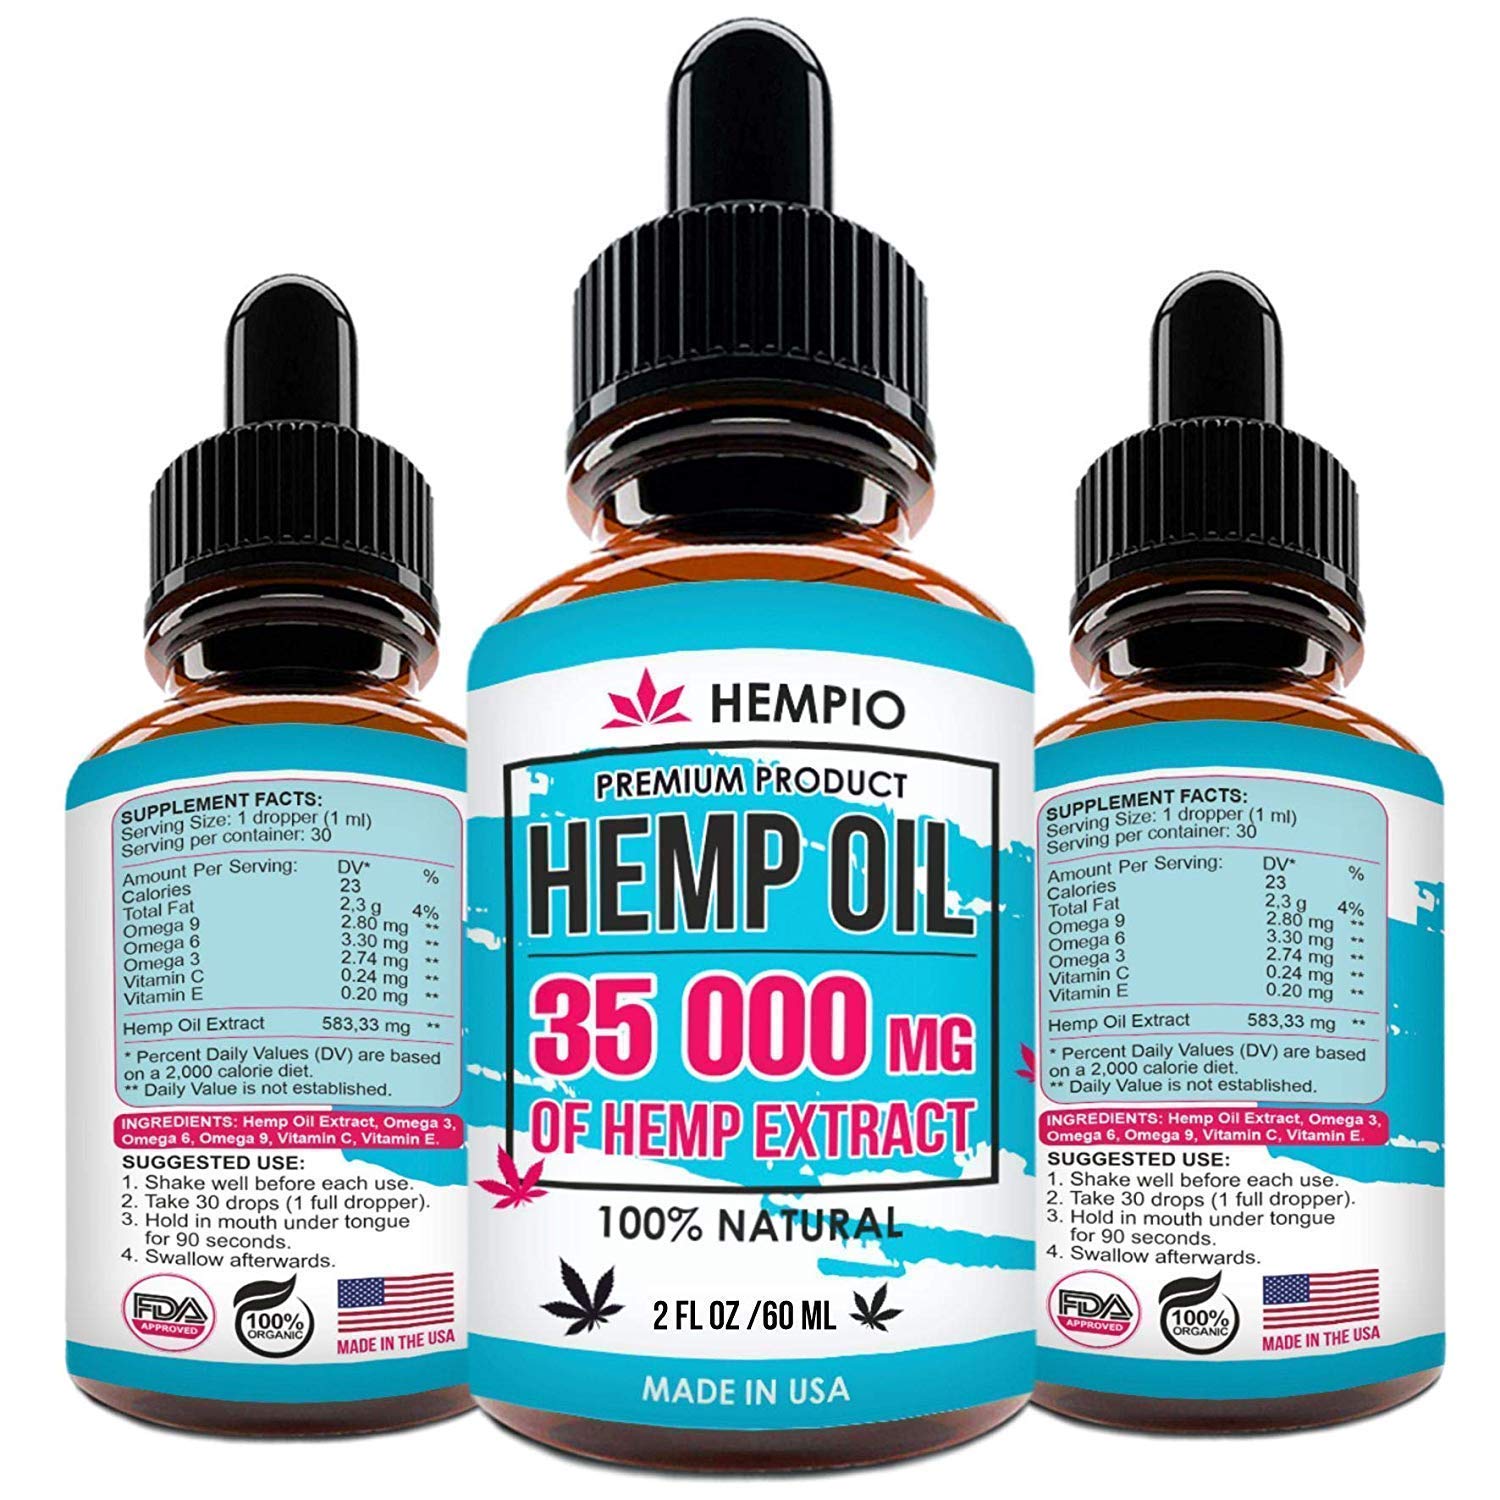 Review of Pure Hemp Extract 35 000 MG for Pain Relief, Relaxation, Sleep and Mood Support, Natural, Organic, Vegan, Zero CBD